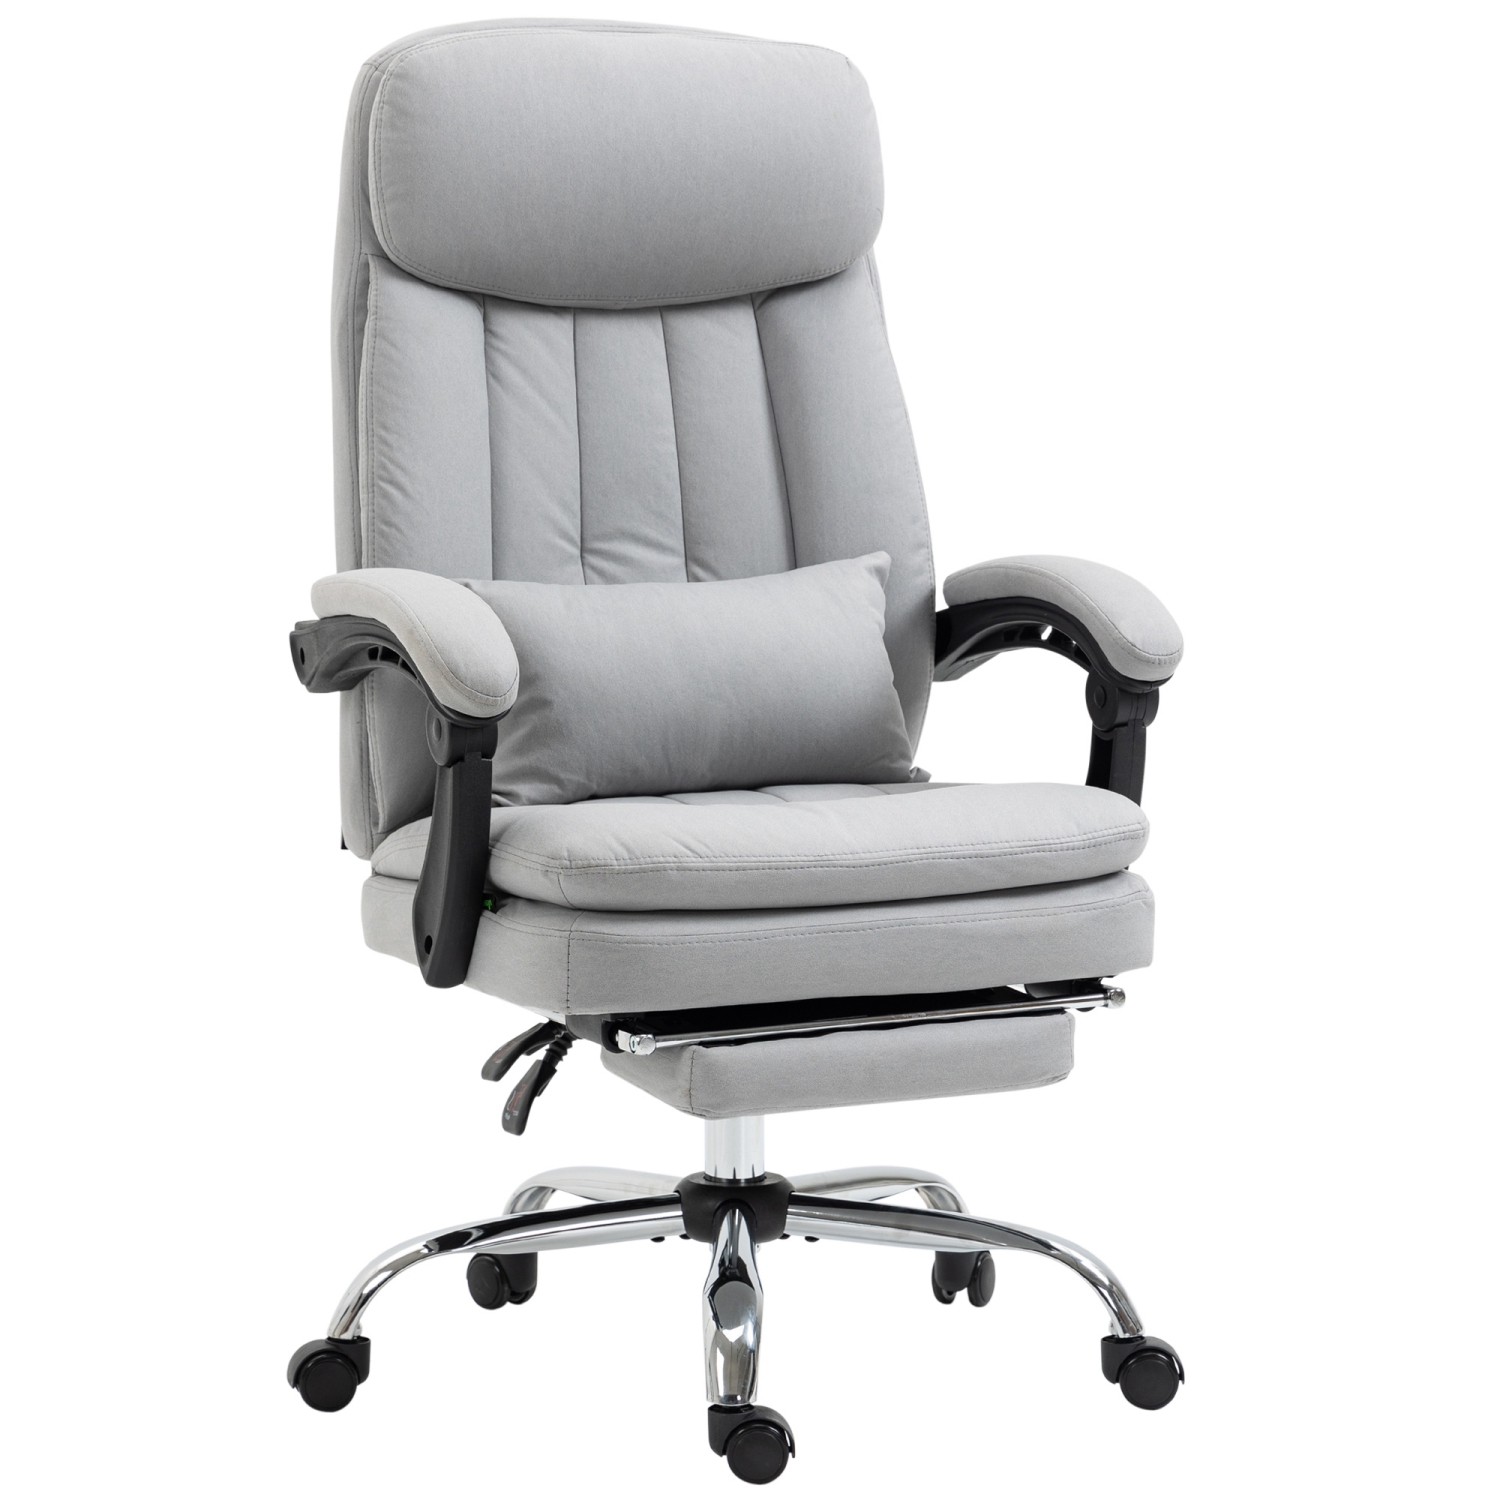 Vinsetto High Back Office Chair, Microfibre Computer Desk Chair with Lumbar Support Pillow, Foot Rest, Reclining Back, Arm, Grey